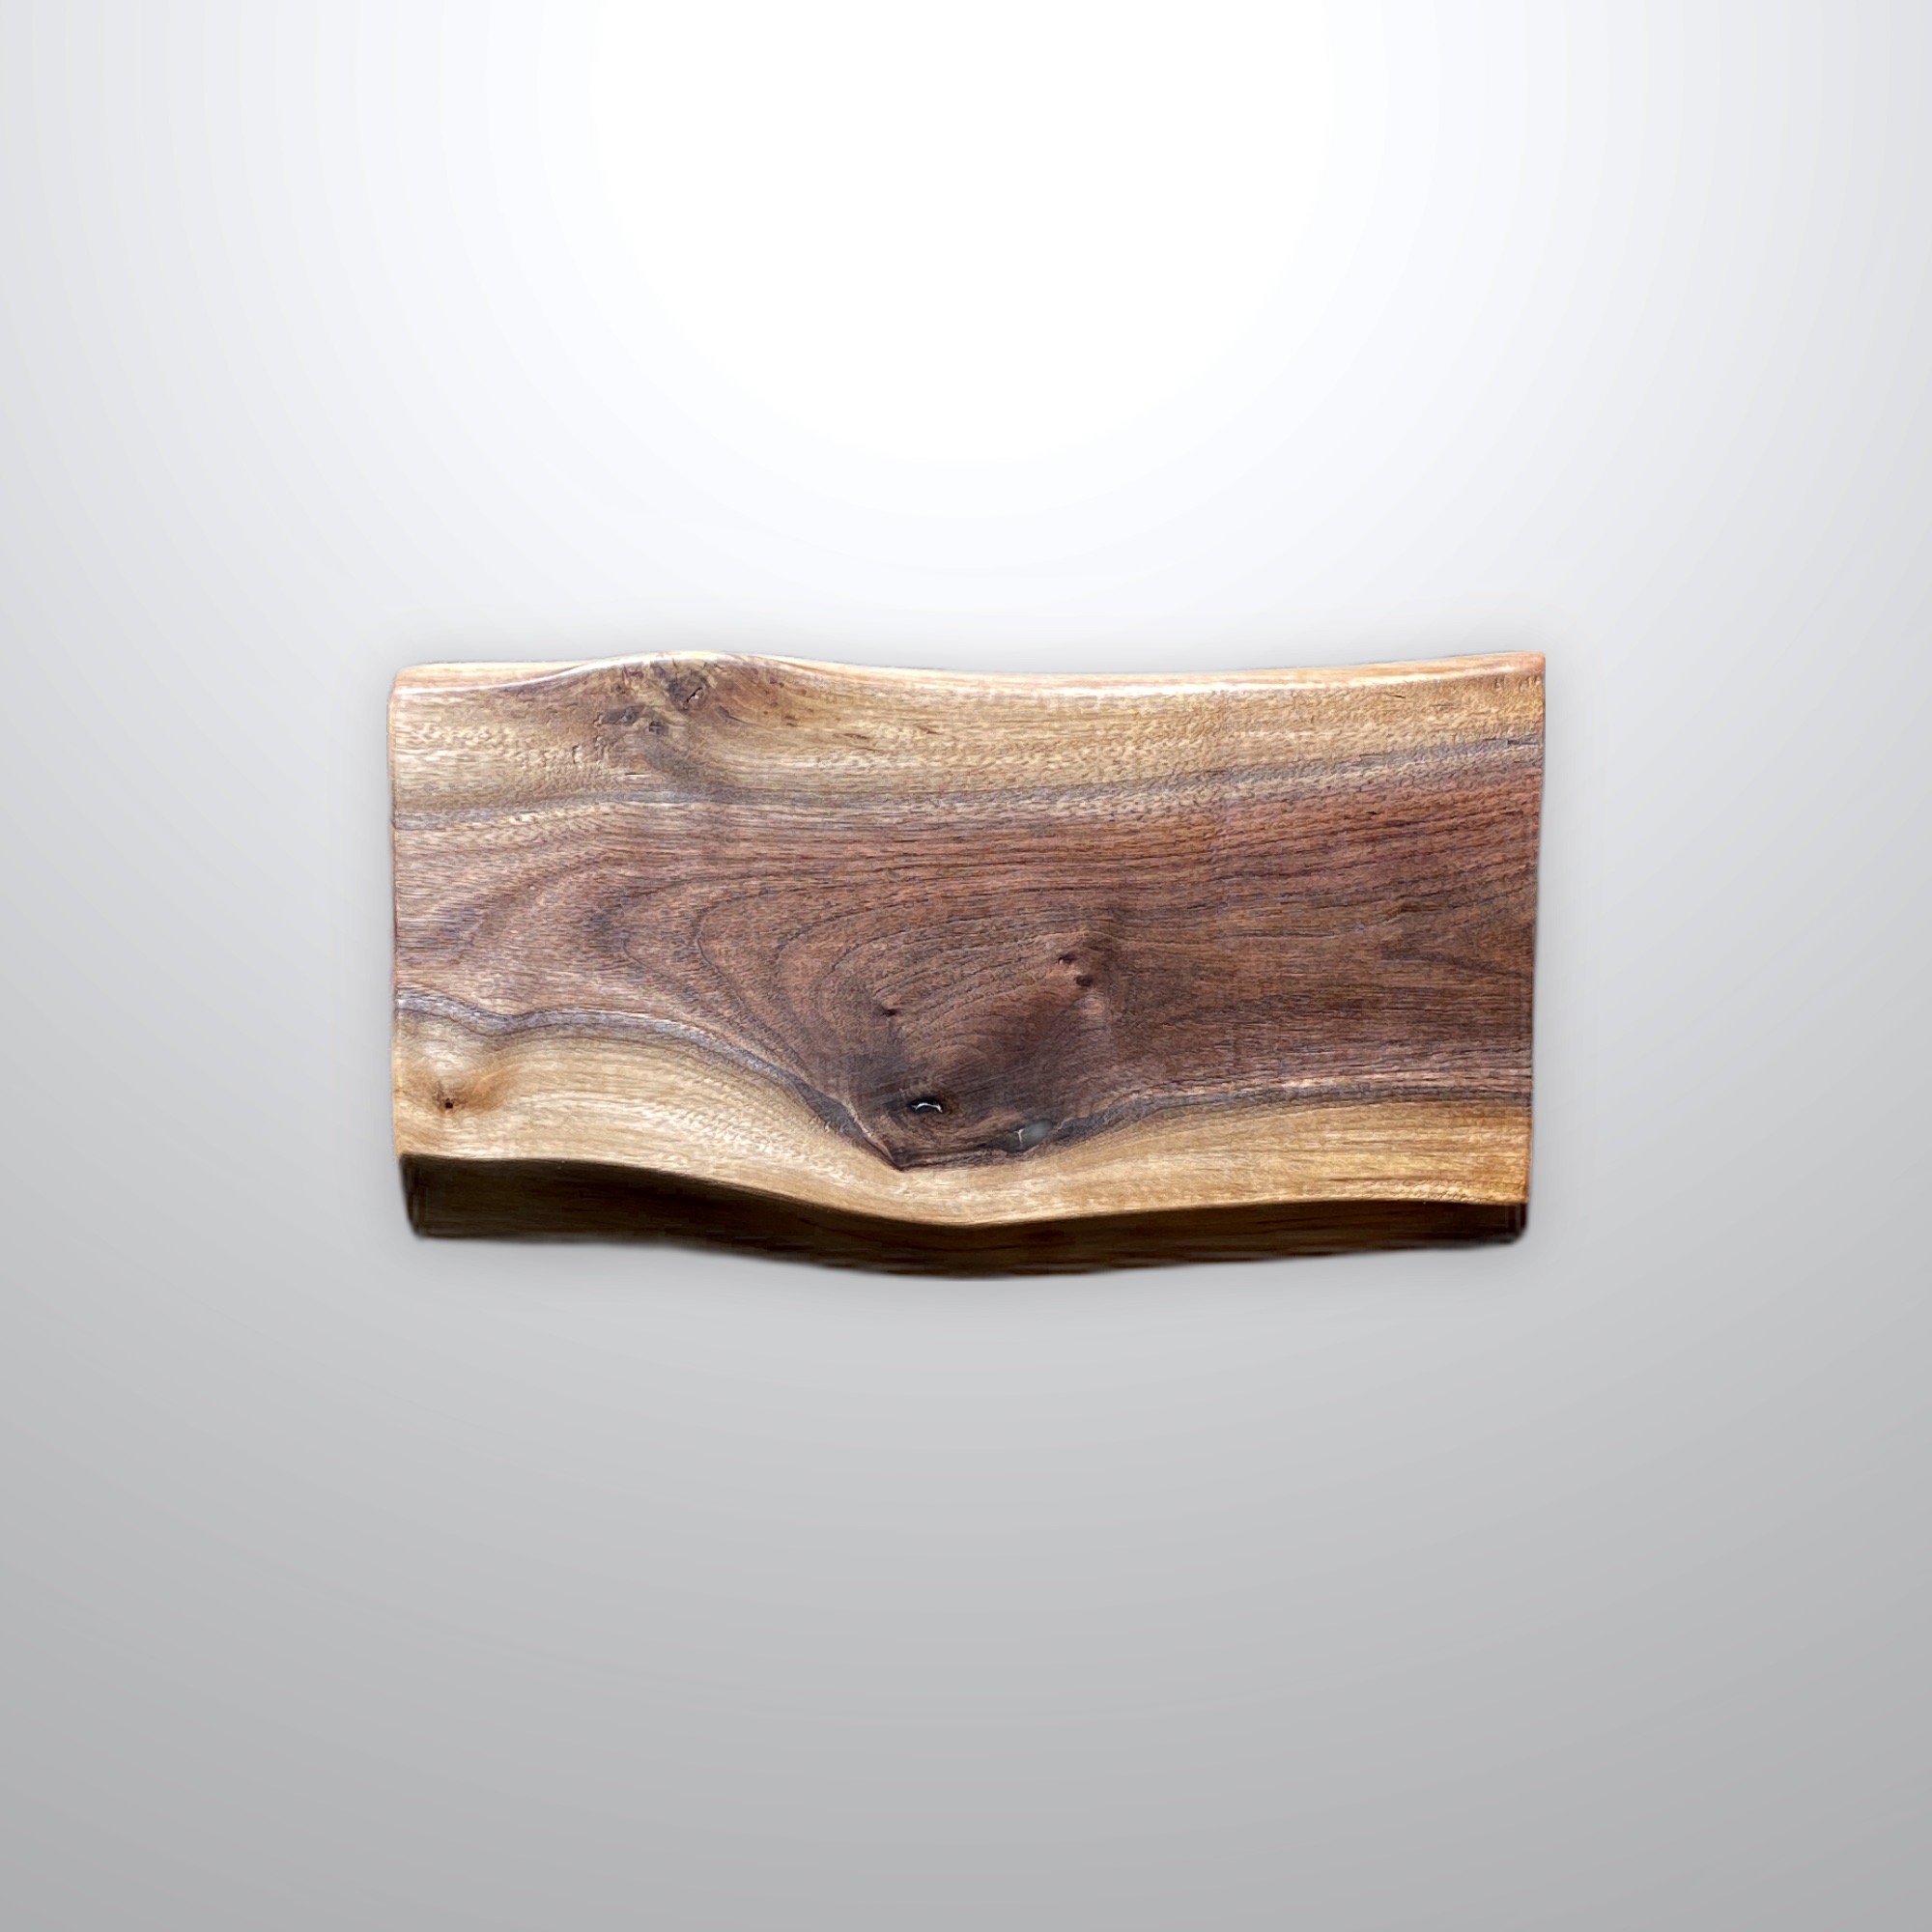 Live edge walnut cutting board; designed and made by Joh Wayne Hill of DeathGhost Studios